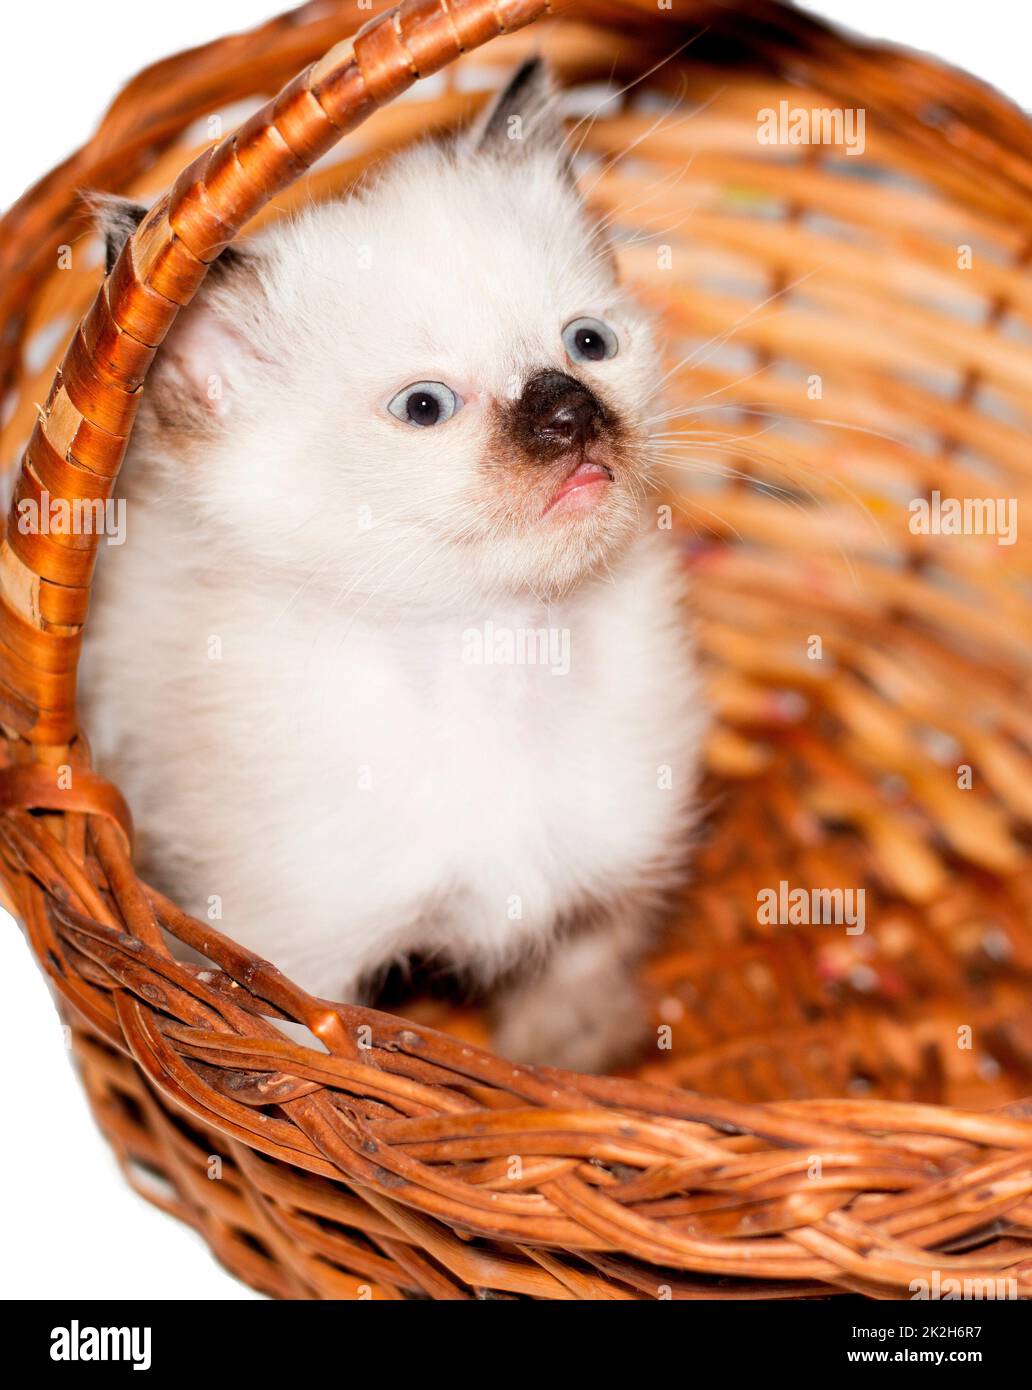 isolated image of a small Thai kitten peeking out of a basket Stock Photo